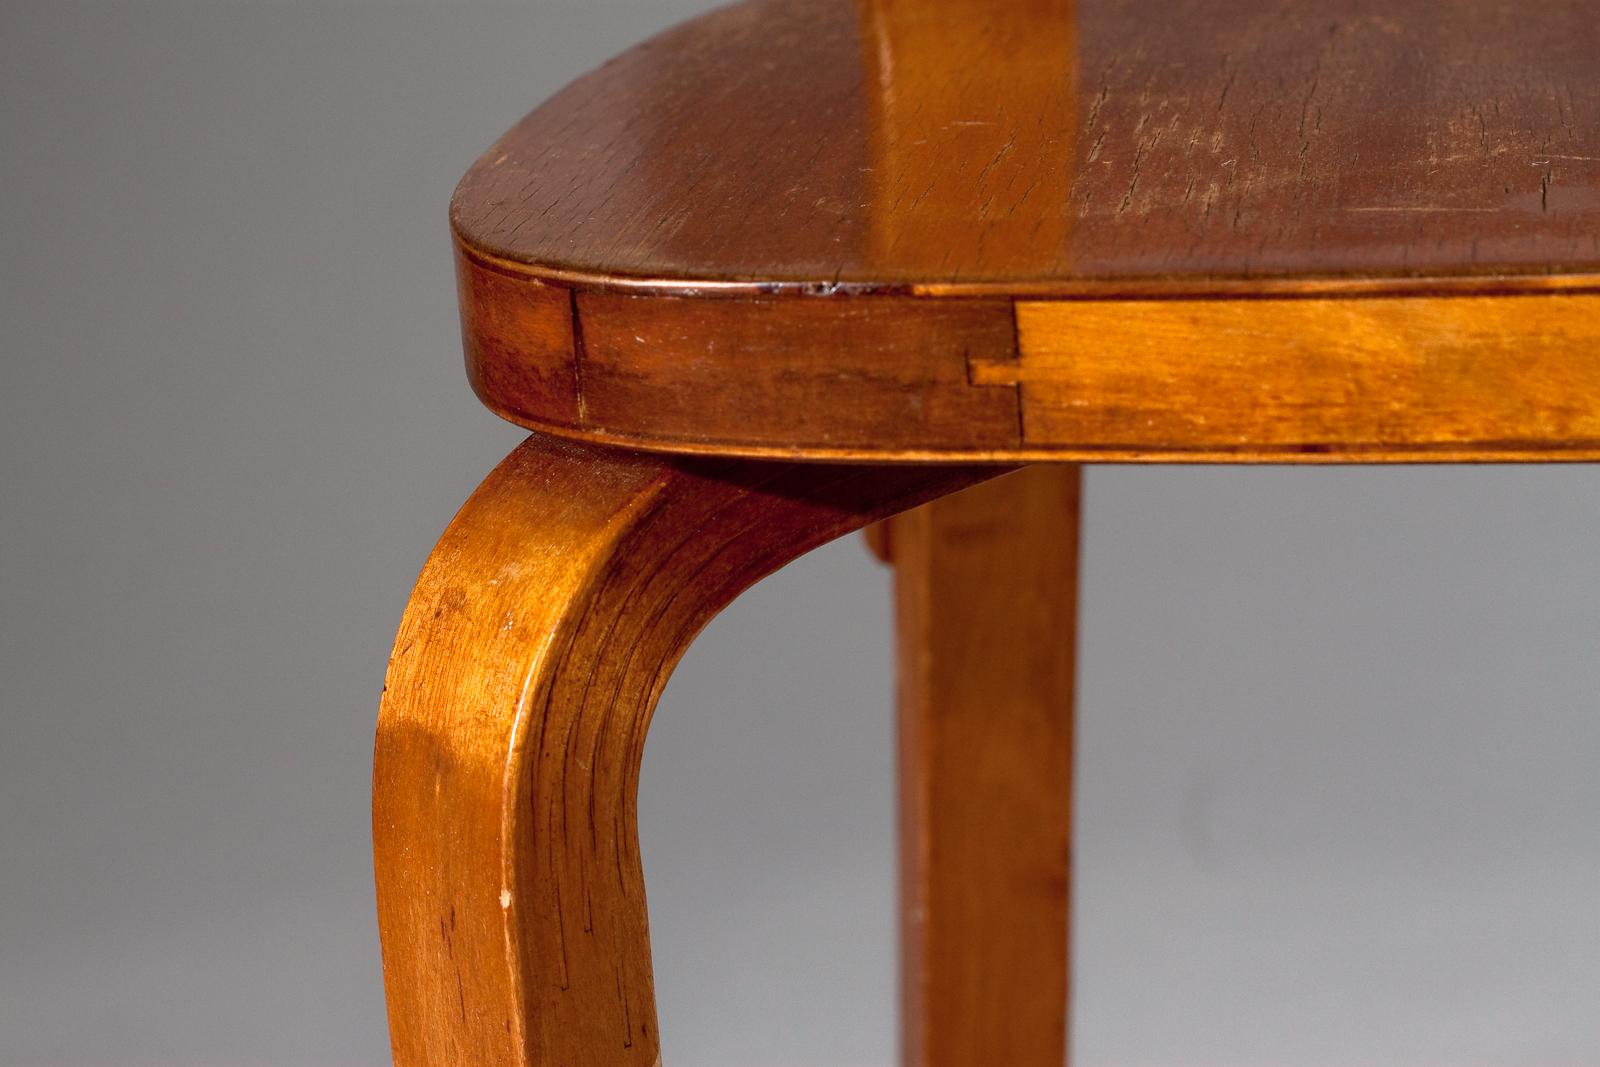 Finnish Alvar Aalto, Original 1930s Chair 69 with Great Colour and Patina For Sale